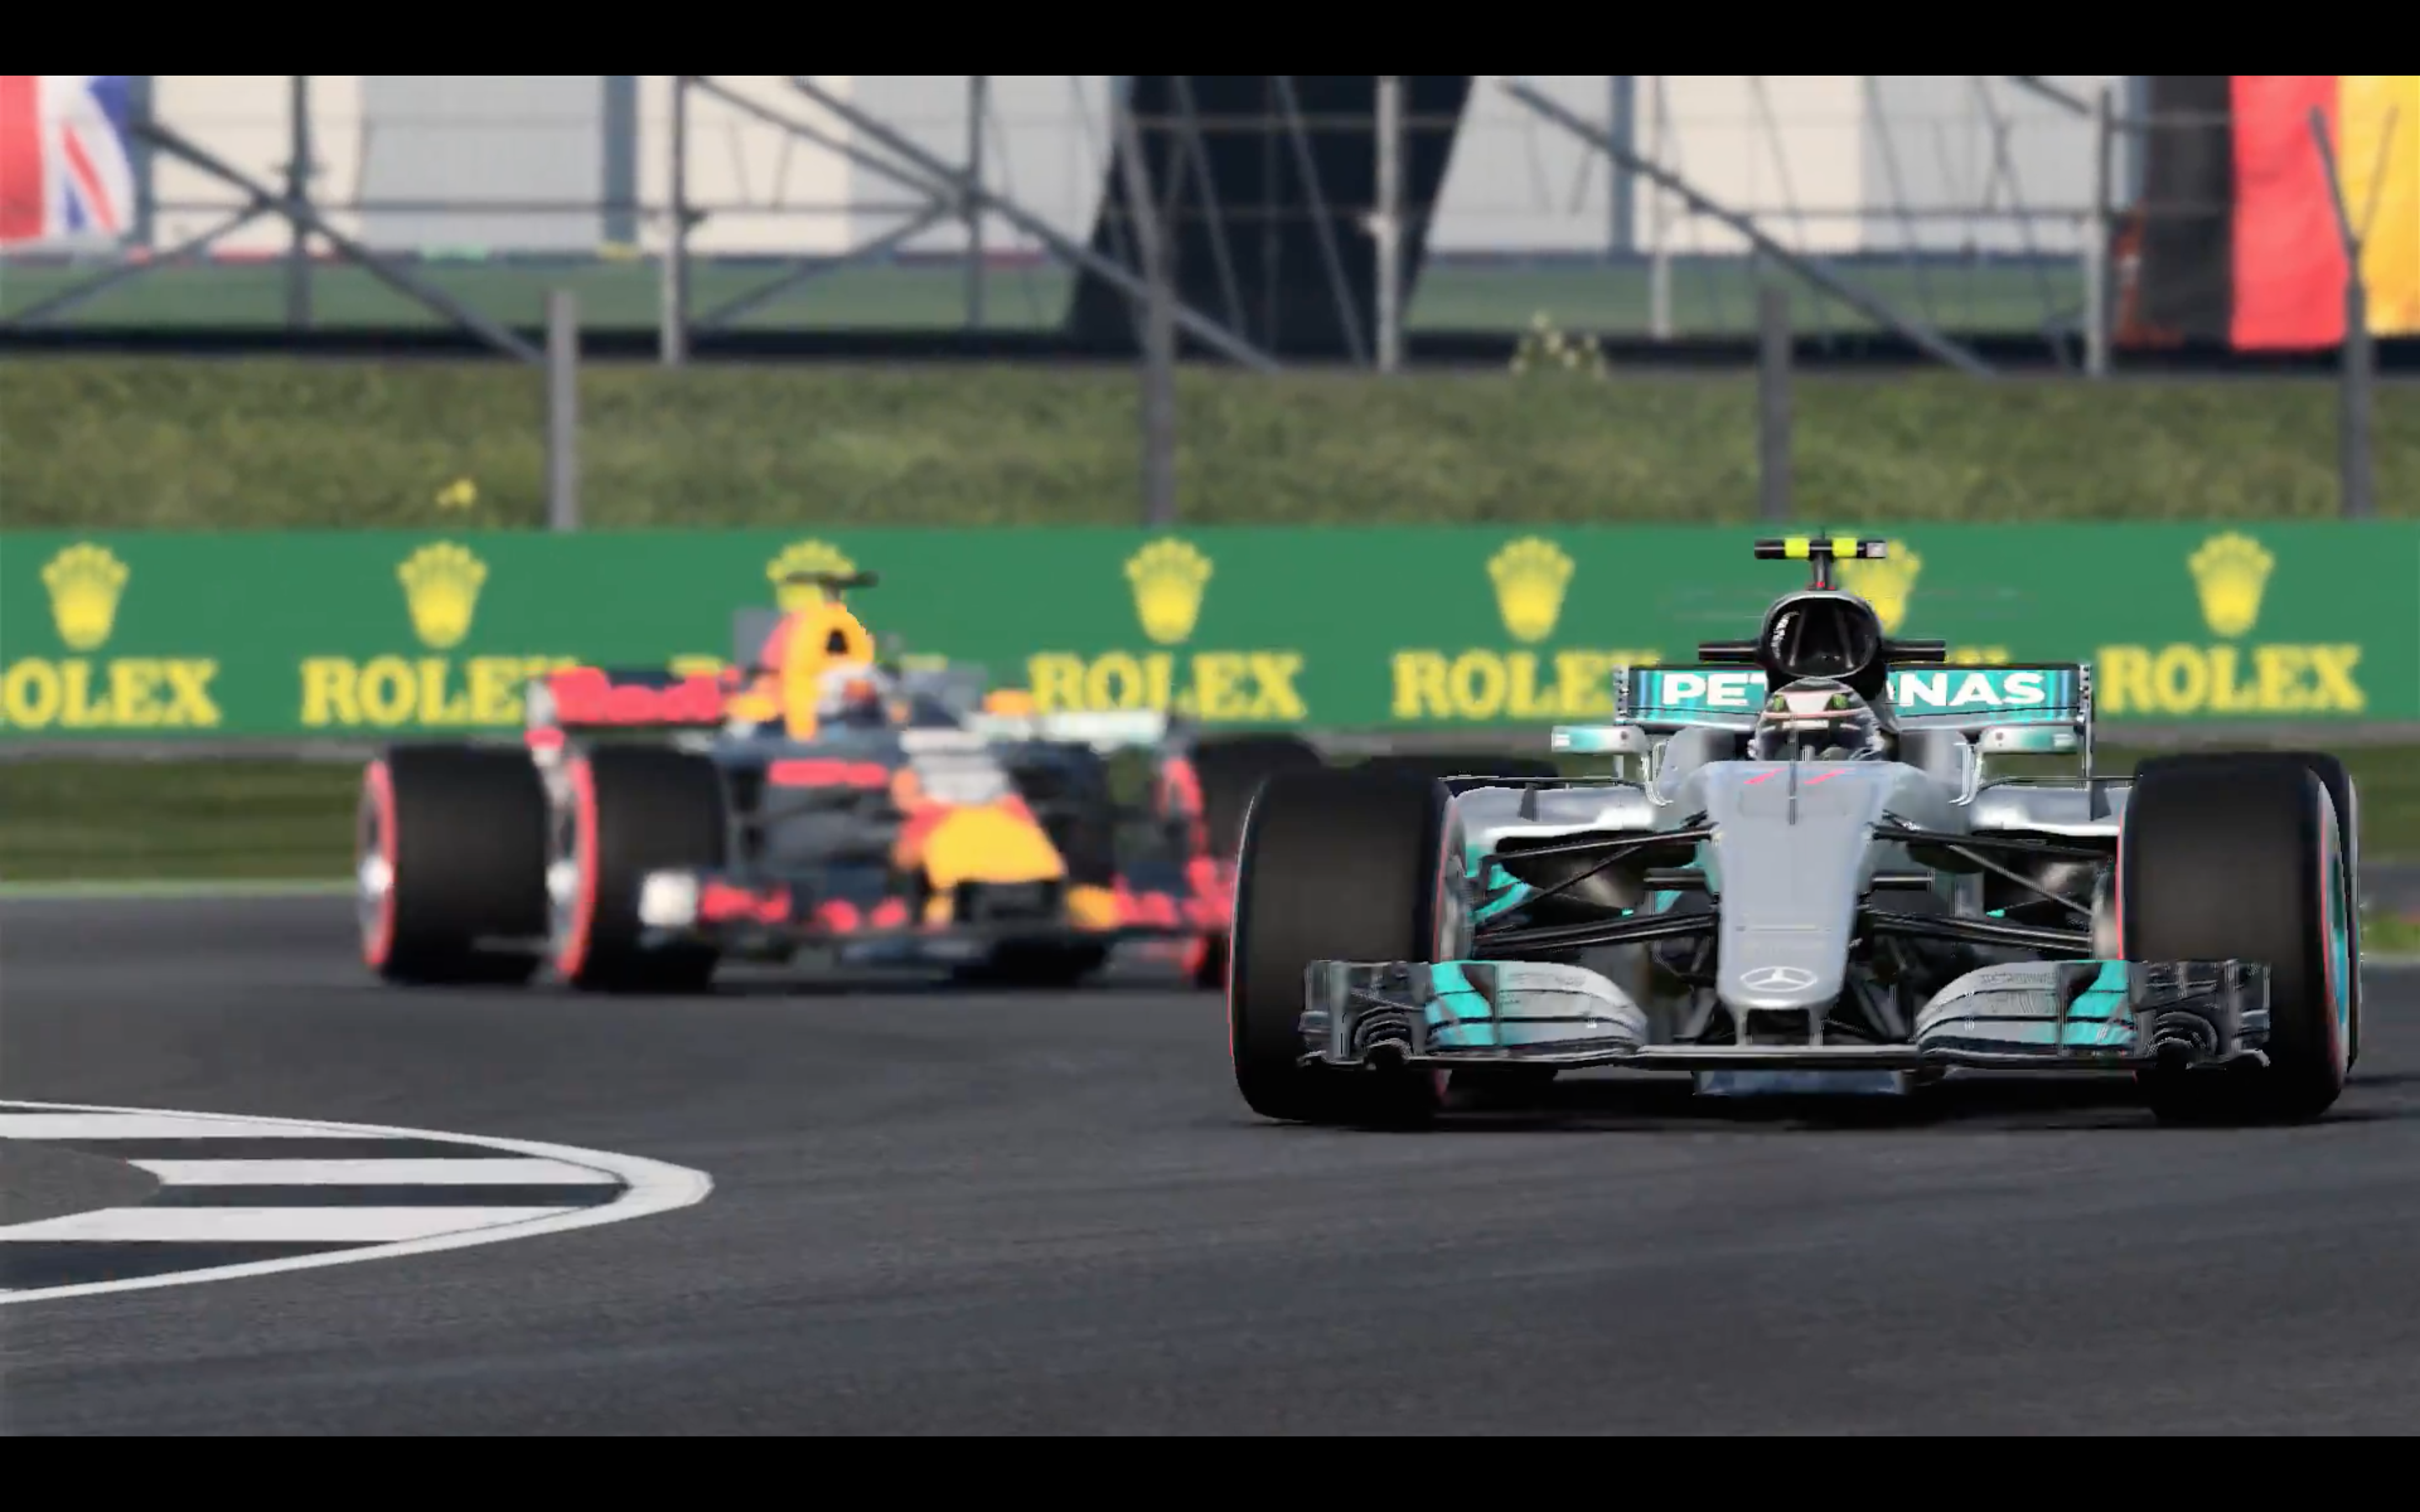 F1 2017 review: The most immersive racer to date